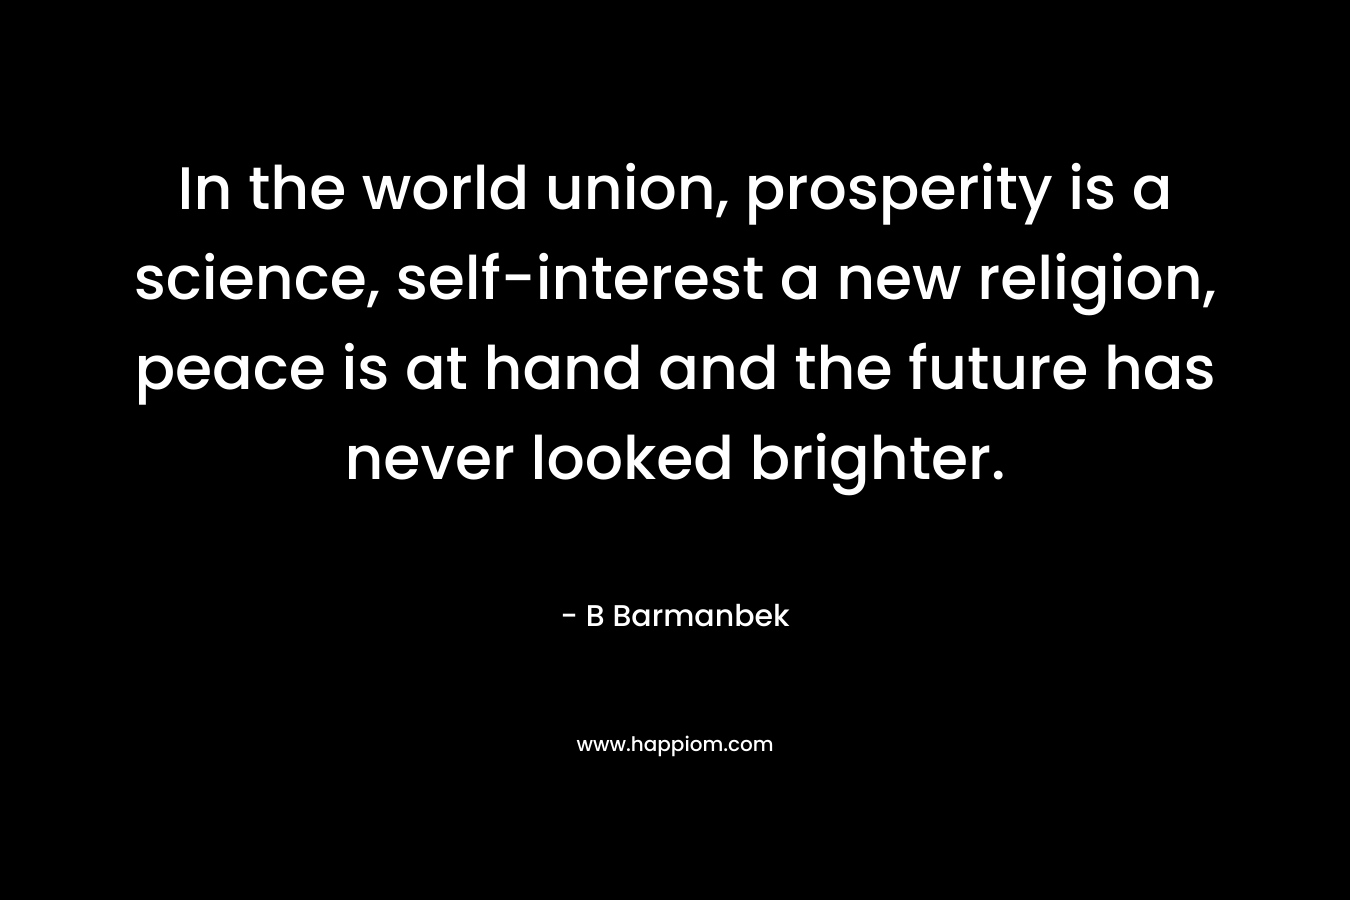 In the world union, prosperity is a science, self-interest a new religion, peace is at hand and the future has never looked brighter. – B Barmanbek